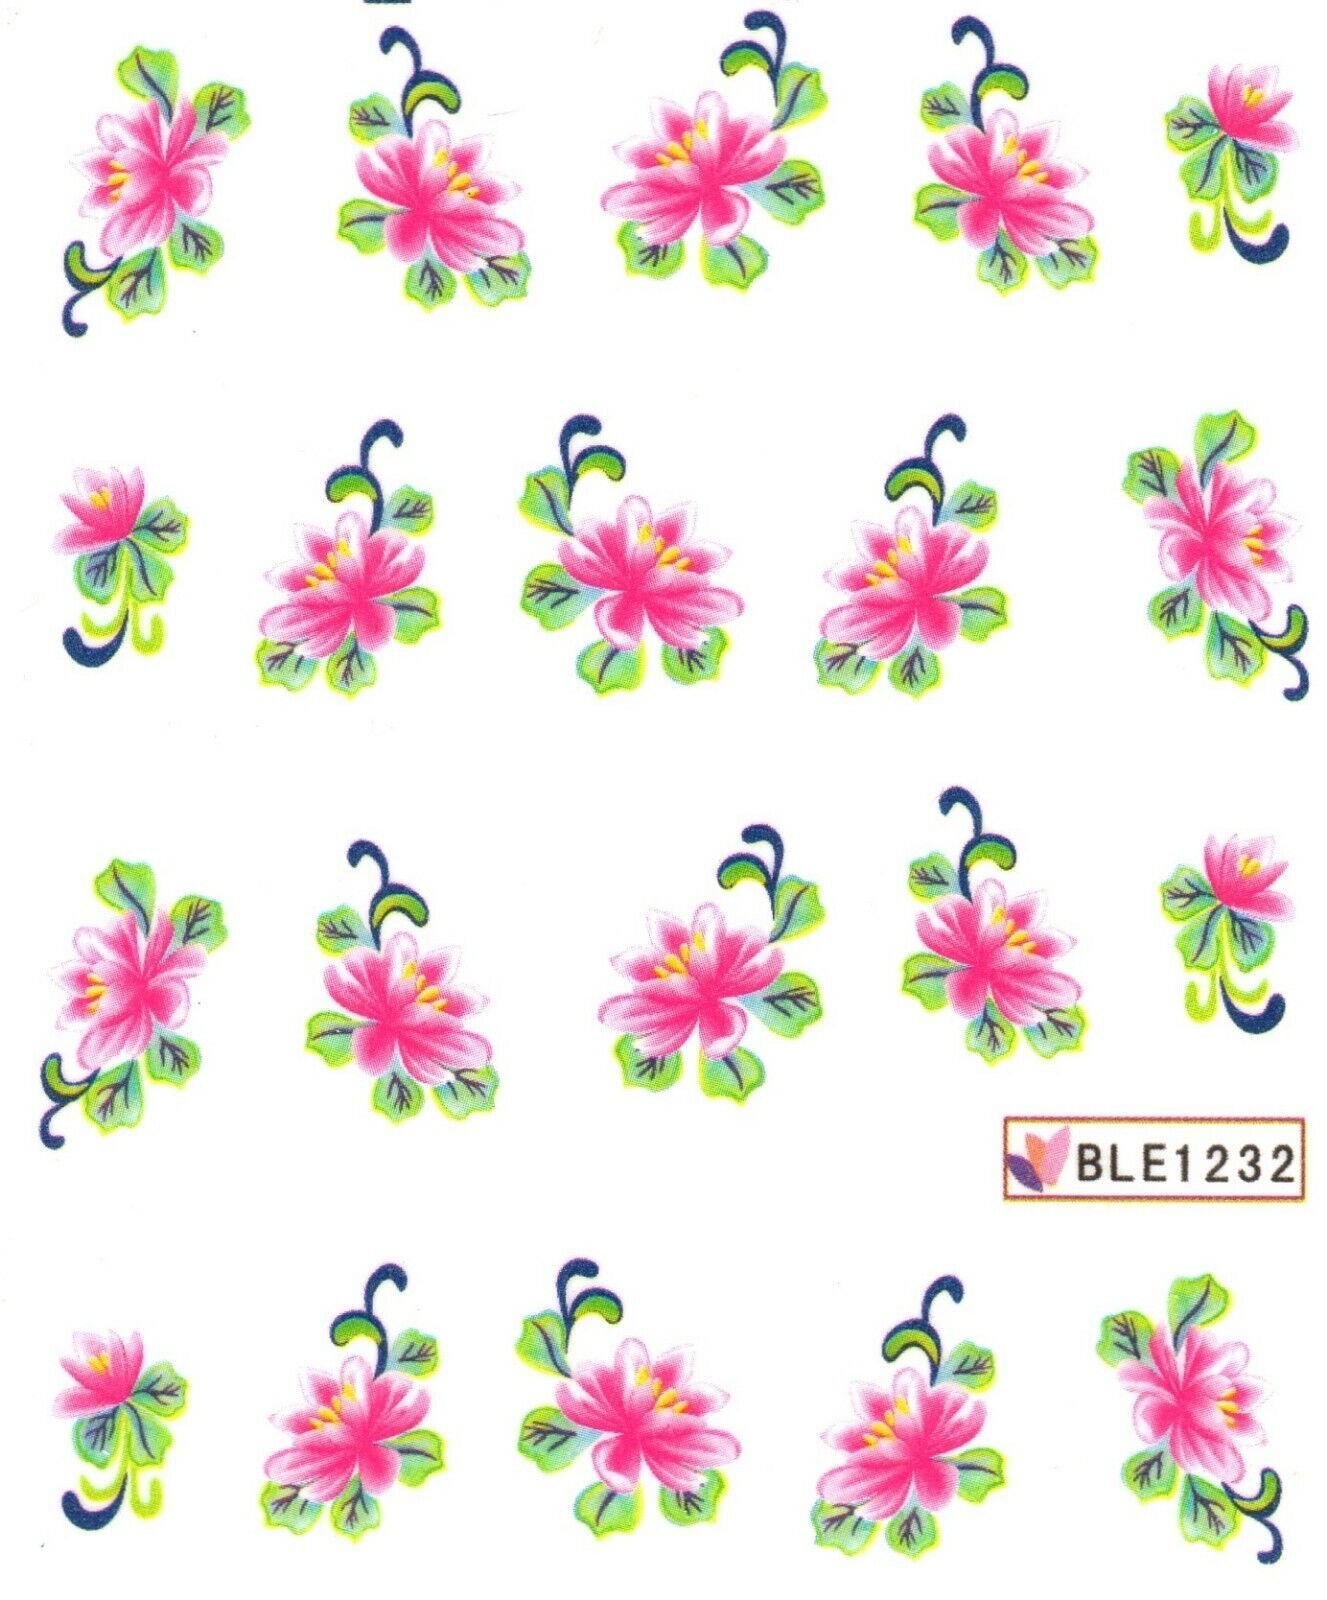 Primary image for Nail Art Water Transfer Sticker Decal Stickers Pretty Flowers Pink Green BLE1232